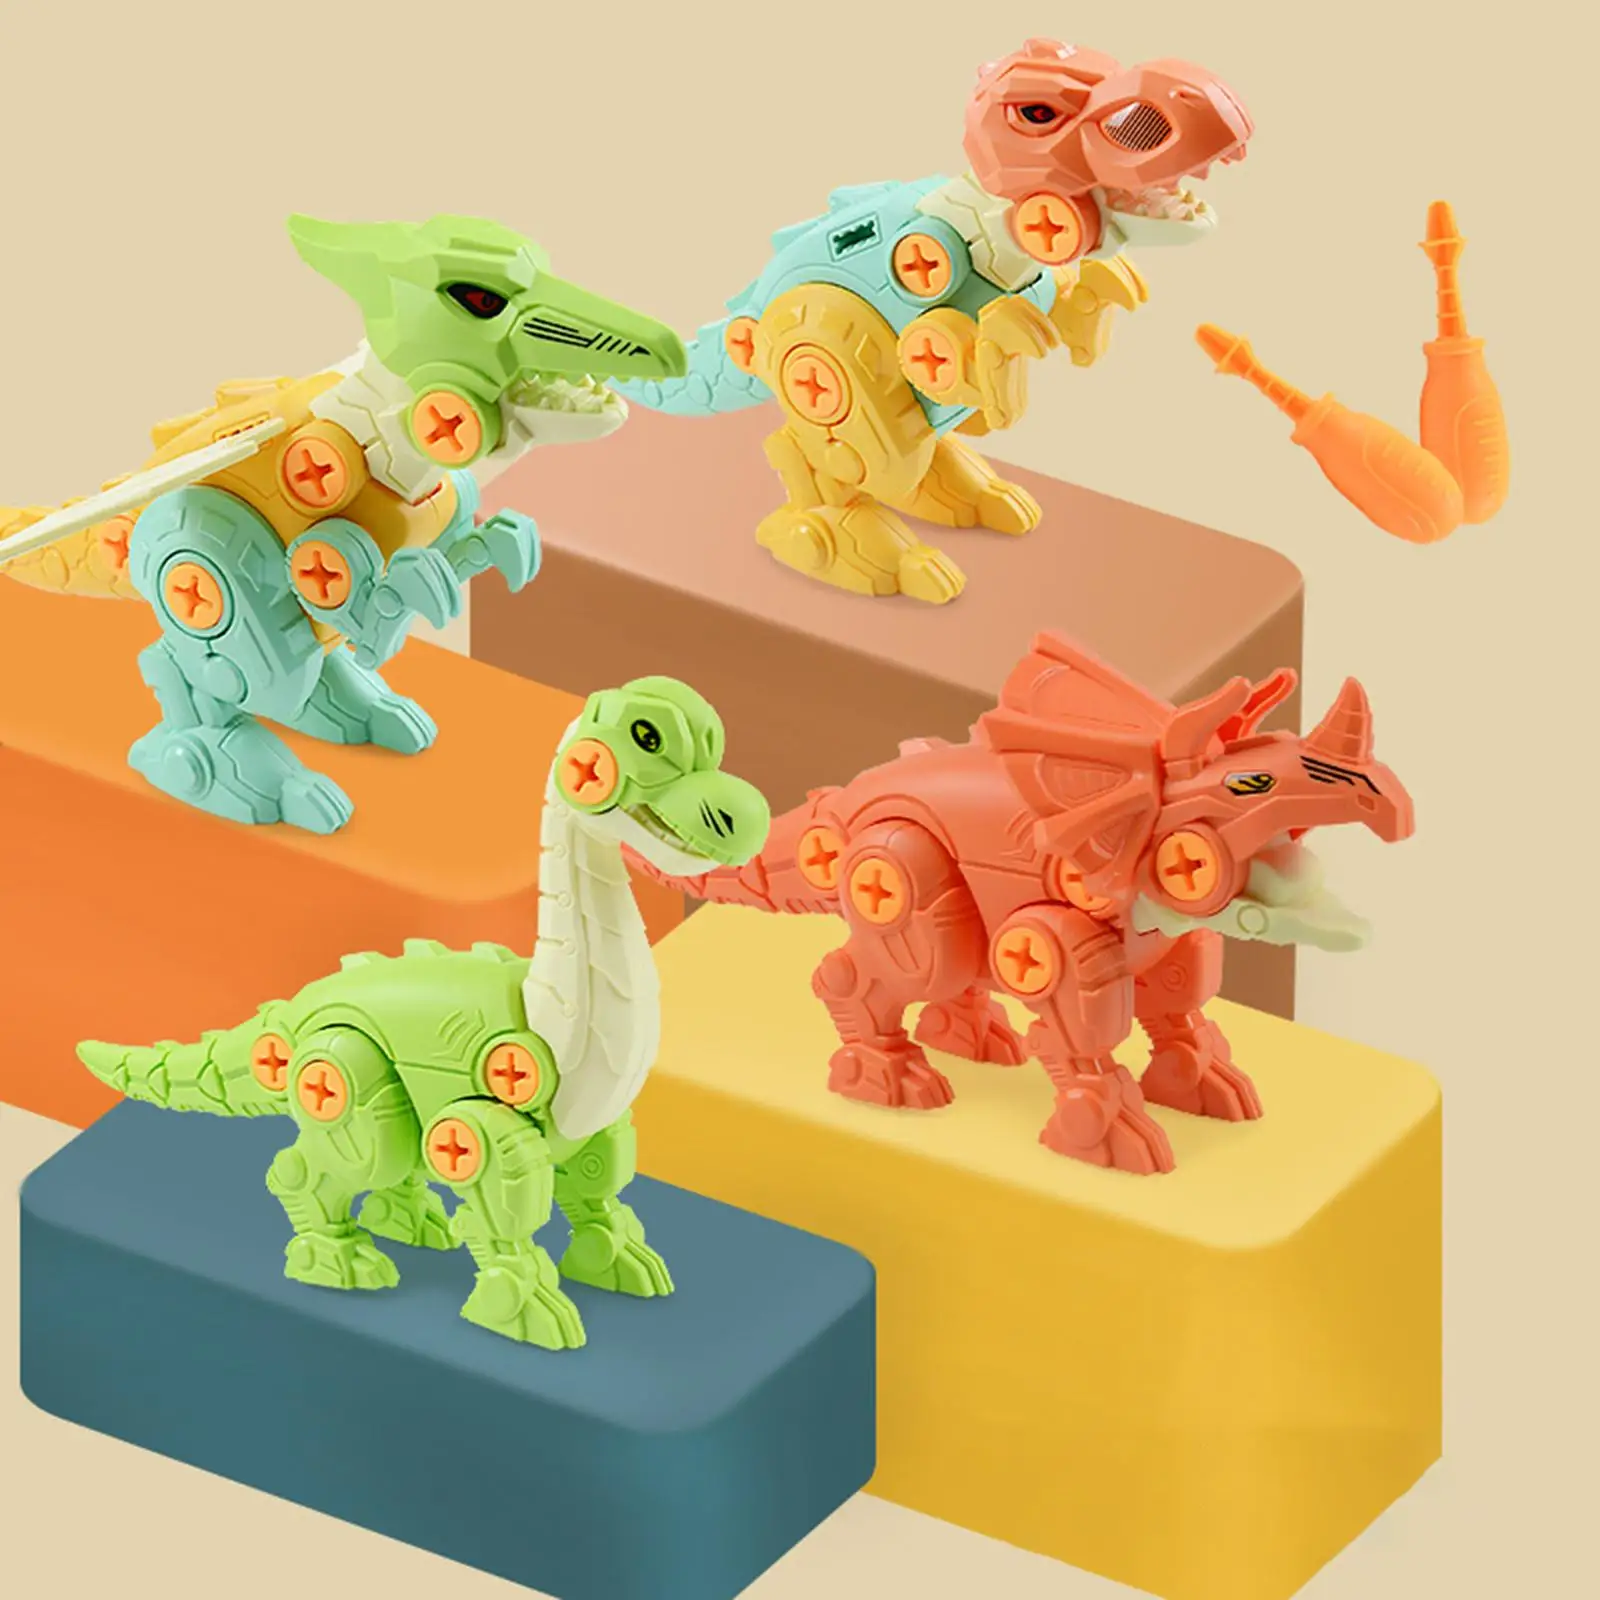 4x Dinosaur Toys Set Construction Toy Educational Toy for Children Toddlers